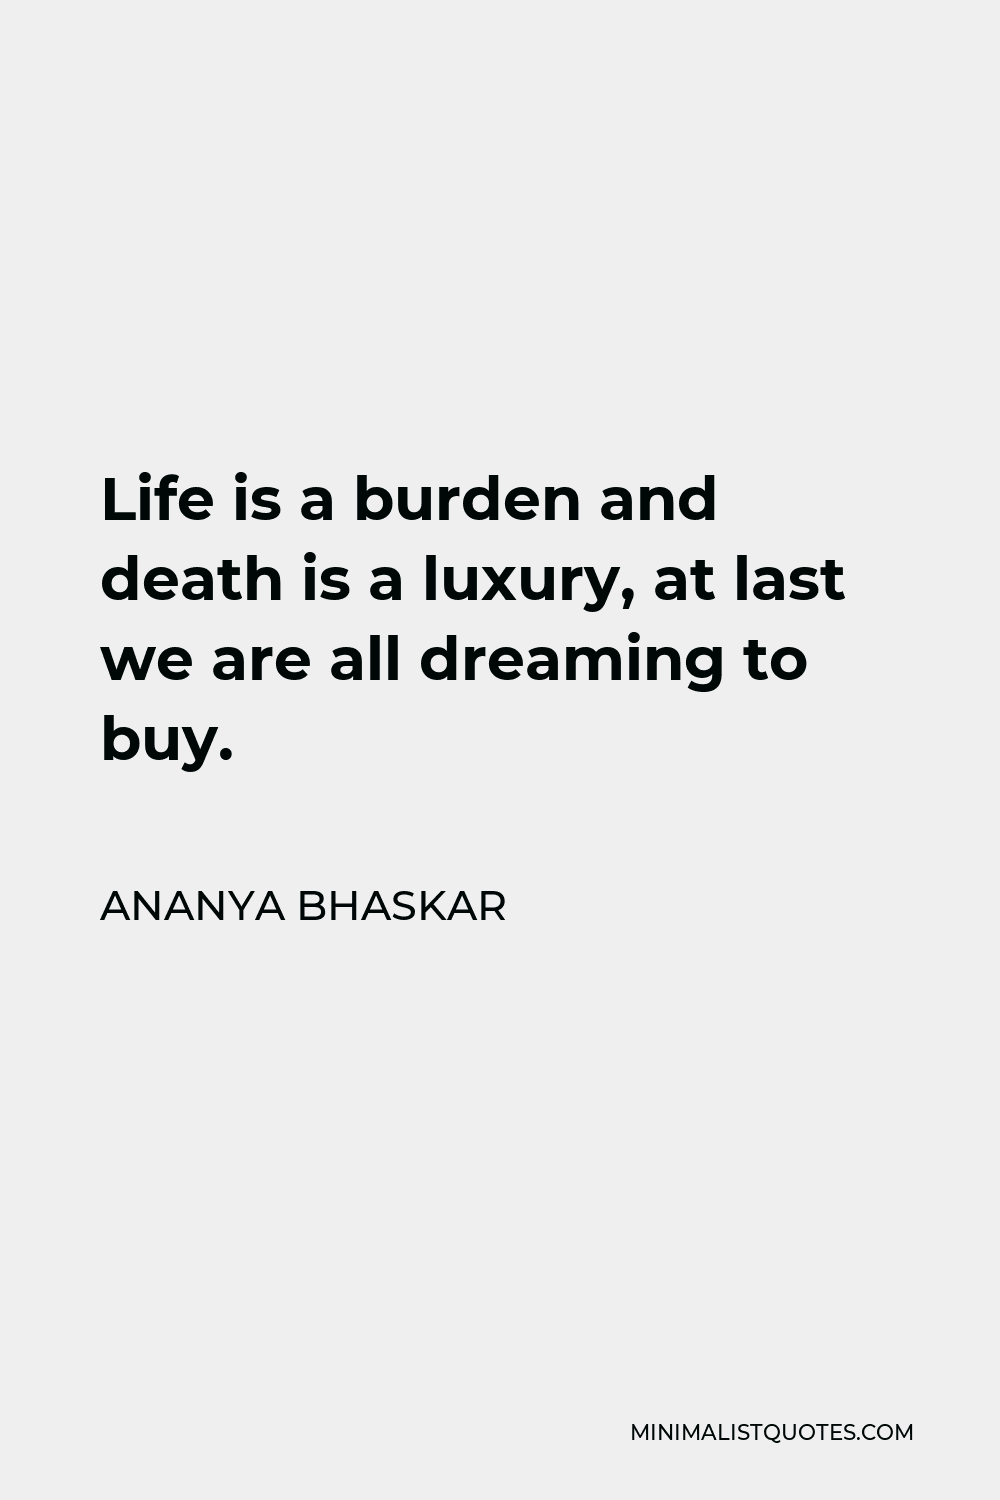 Ananya Bhaskar Quote - Life is a burden and death is a luxury, at last we are all dreaming to buy.